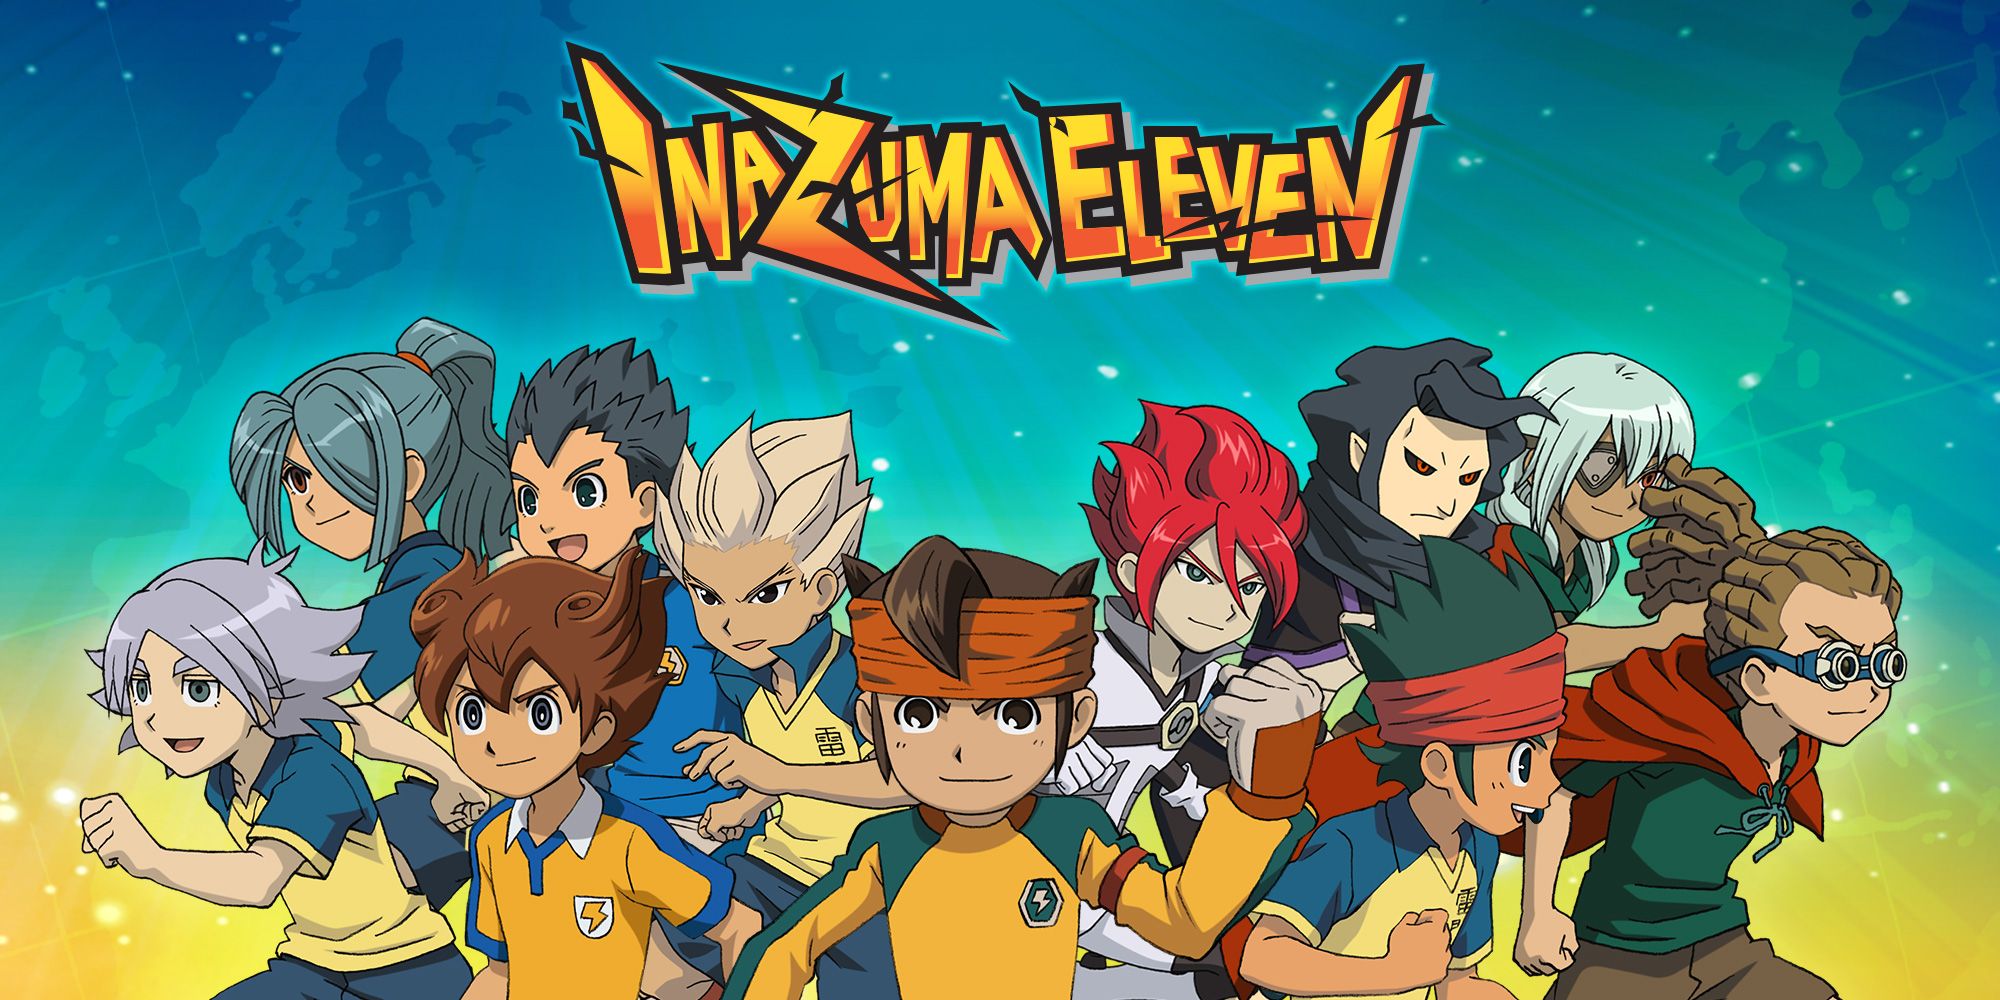 The team of Inazuma Eleven posing together